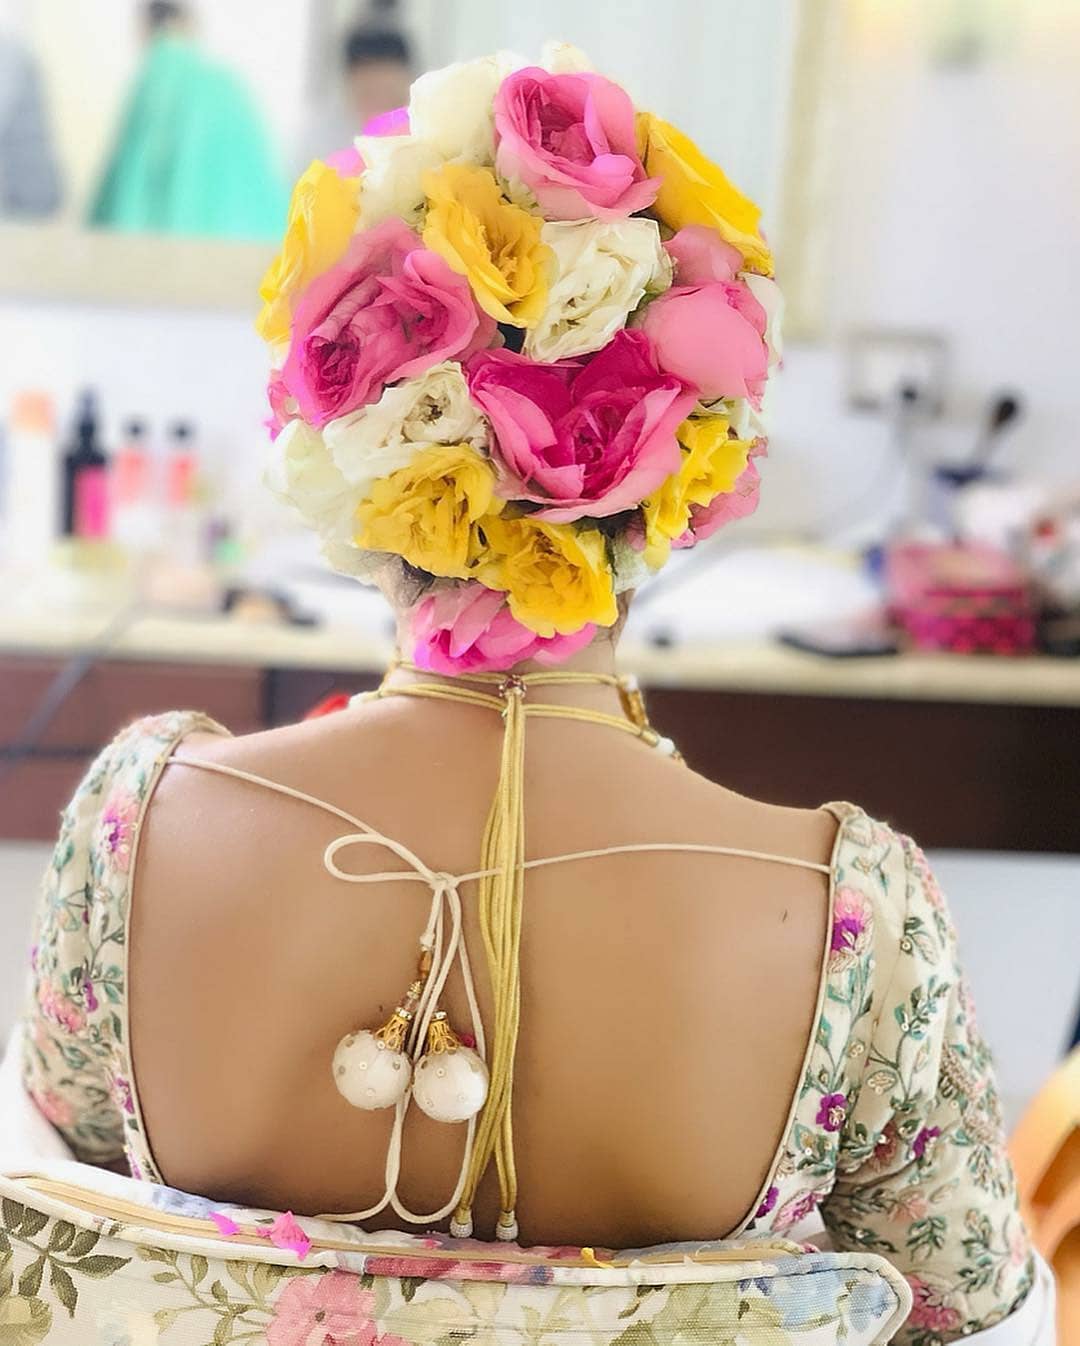 Heavy Bun with Multi-Colored Flowers